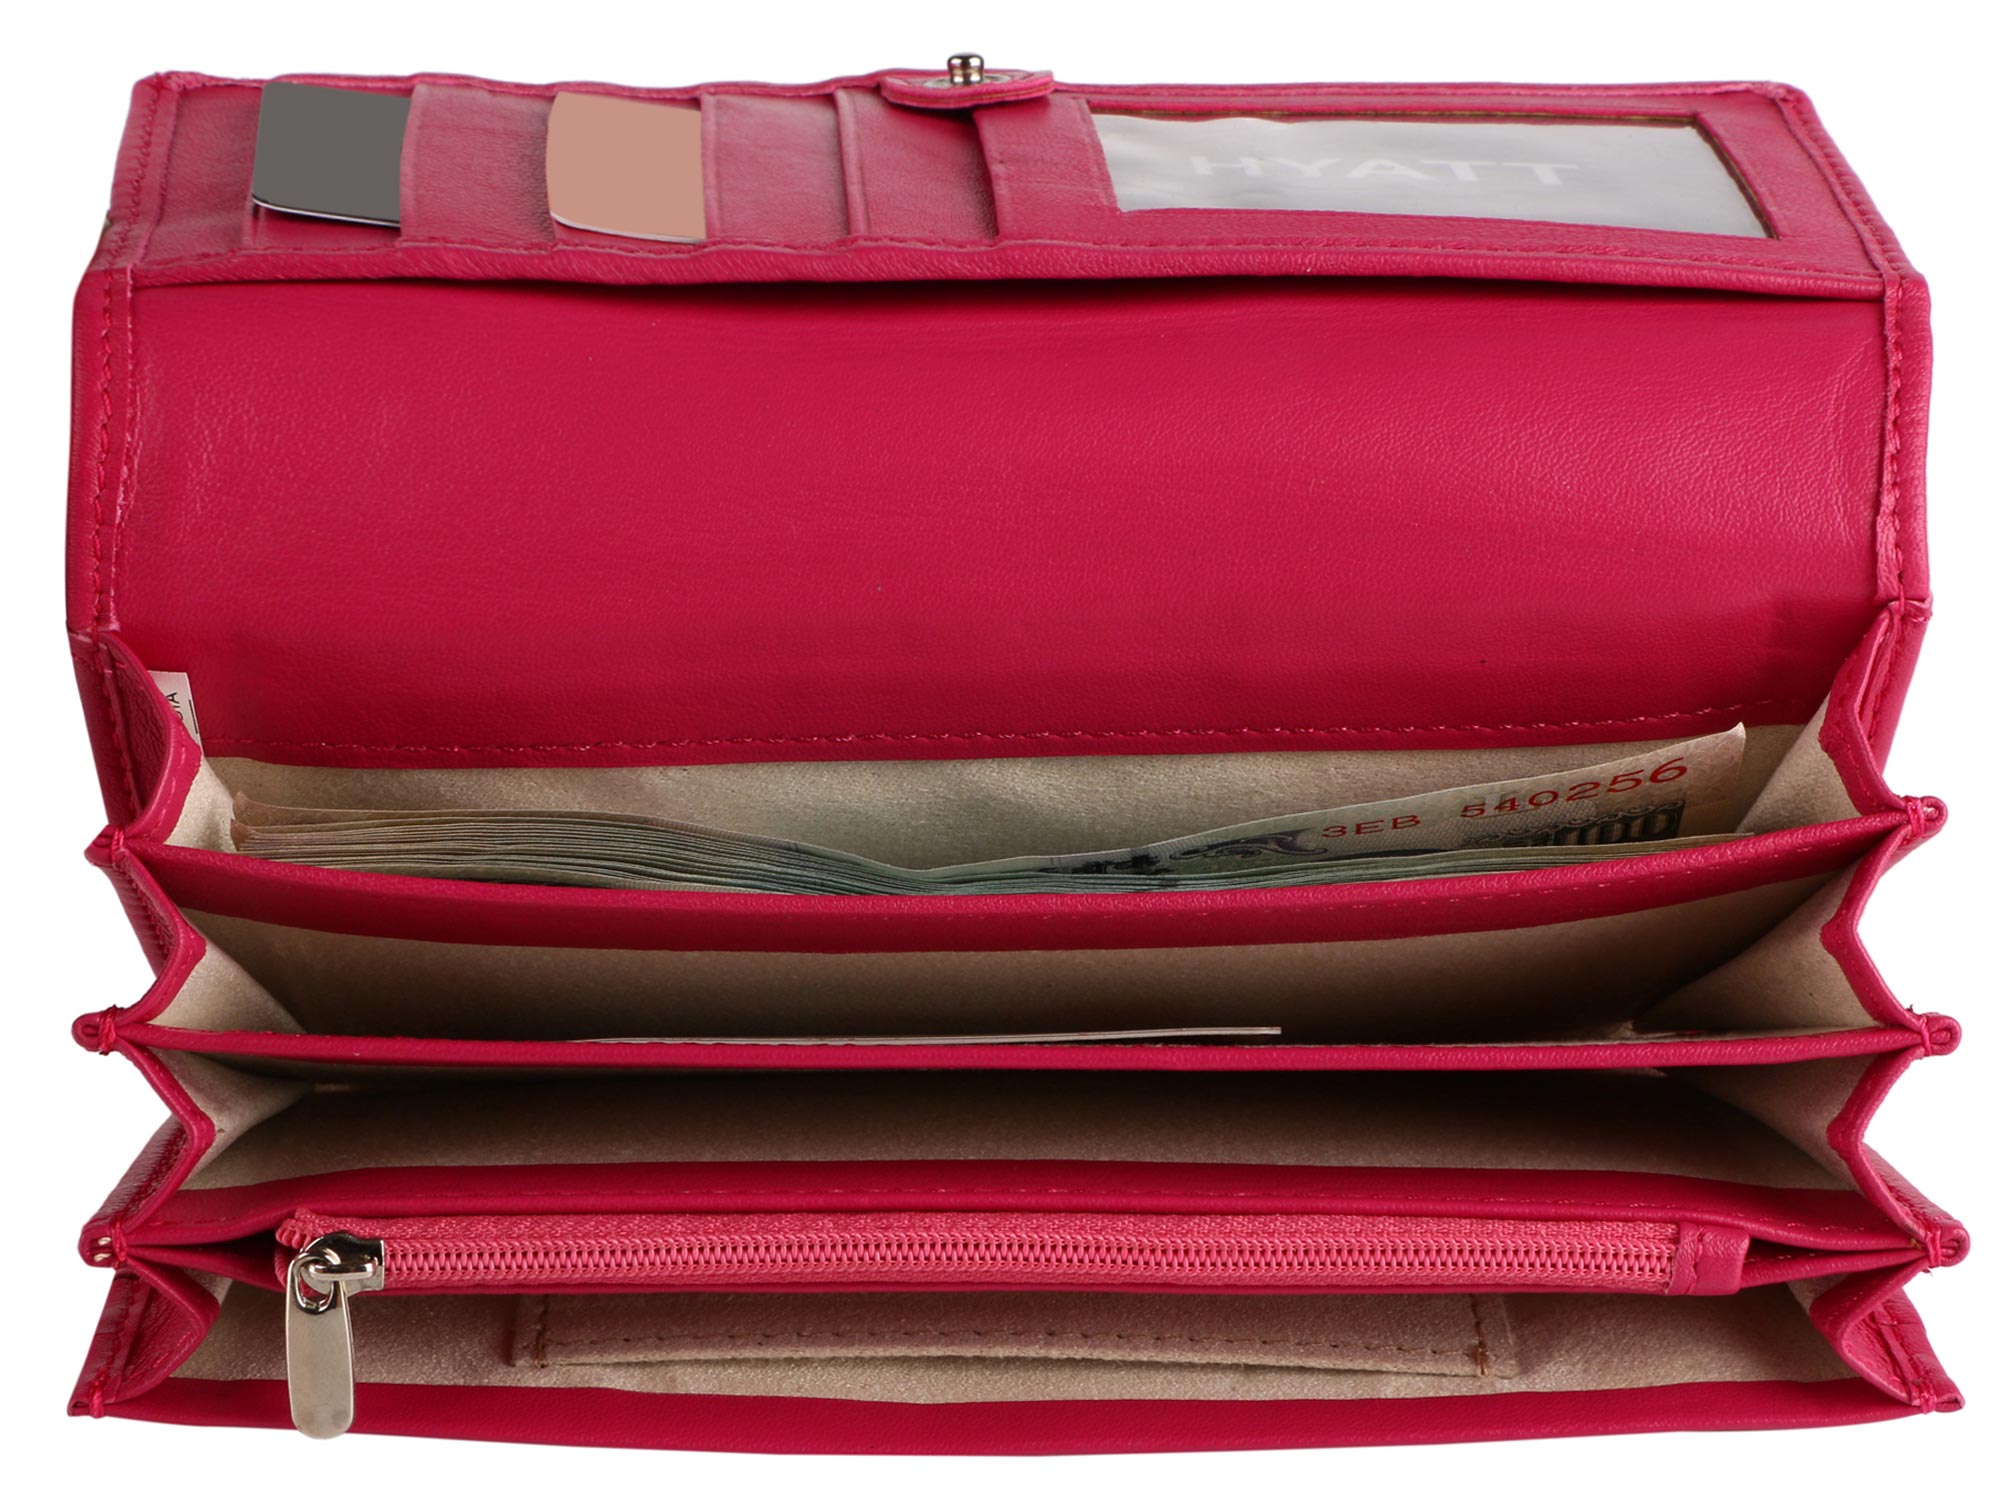 Open image of  pink WOMENS WALLET. It is spacious and poses plenty of compartments